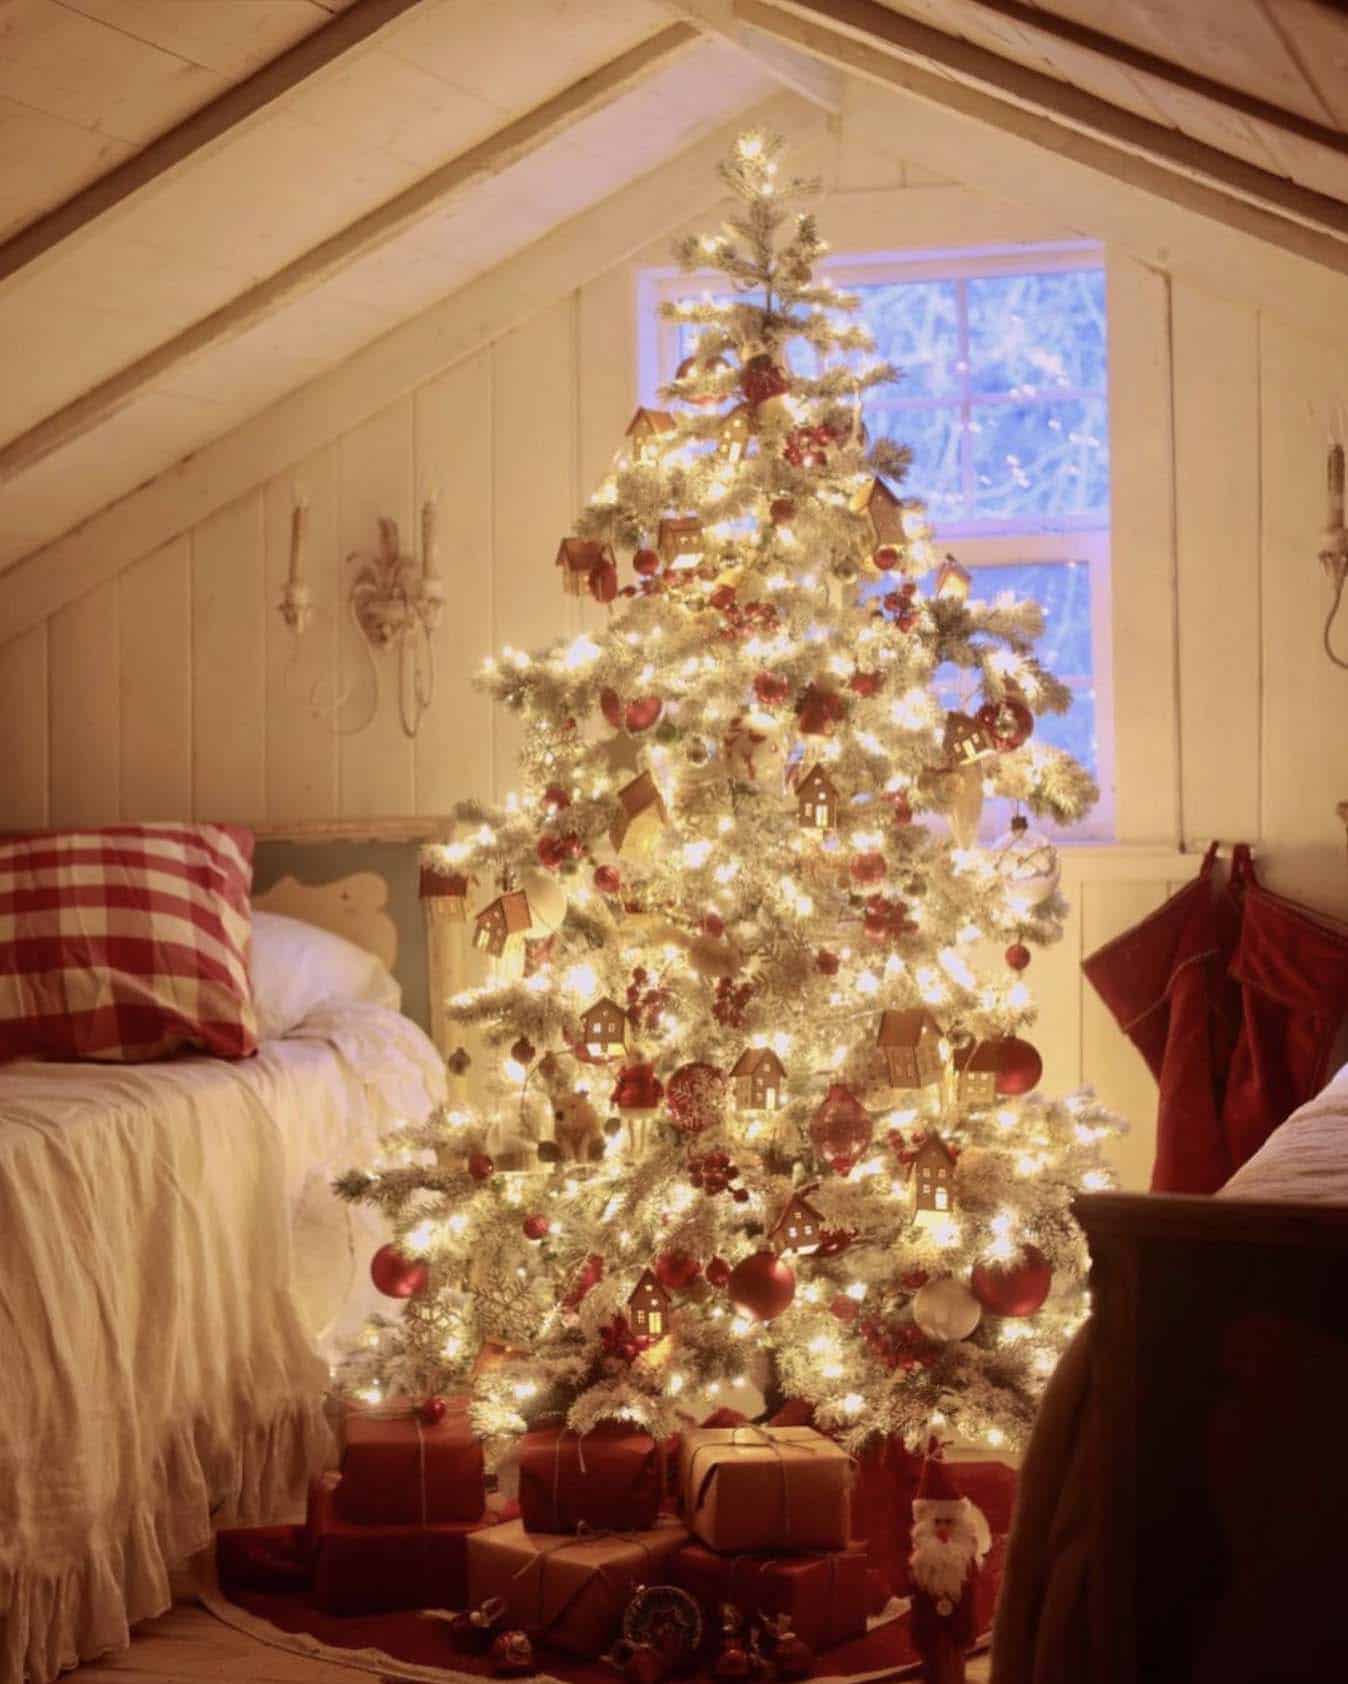 red and white and snow-covered nostalgic tree in an attic bedroom